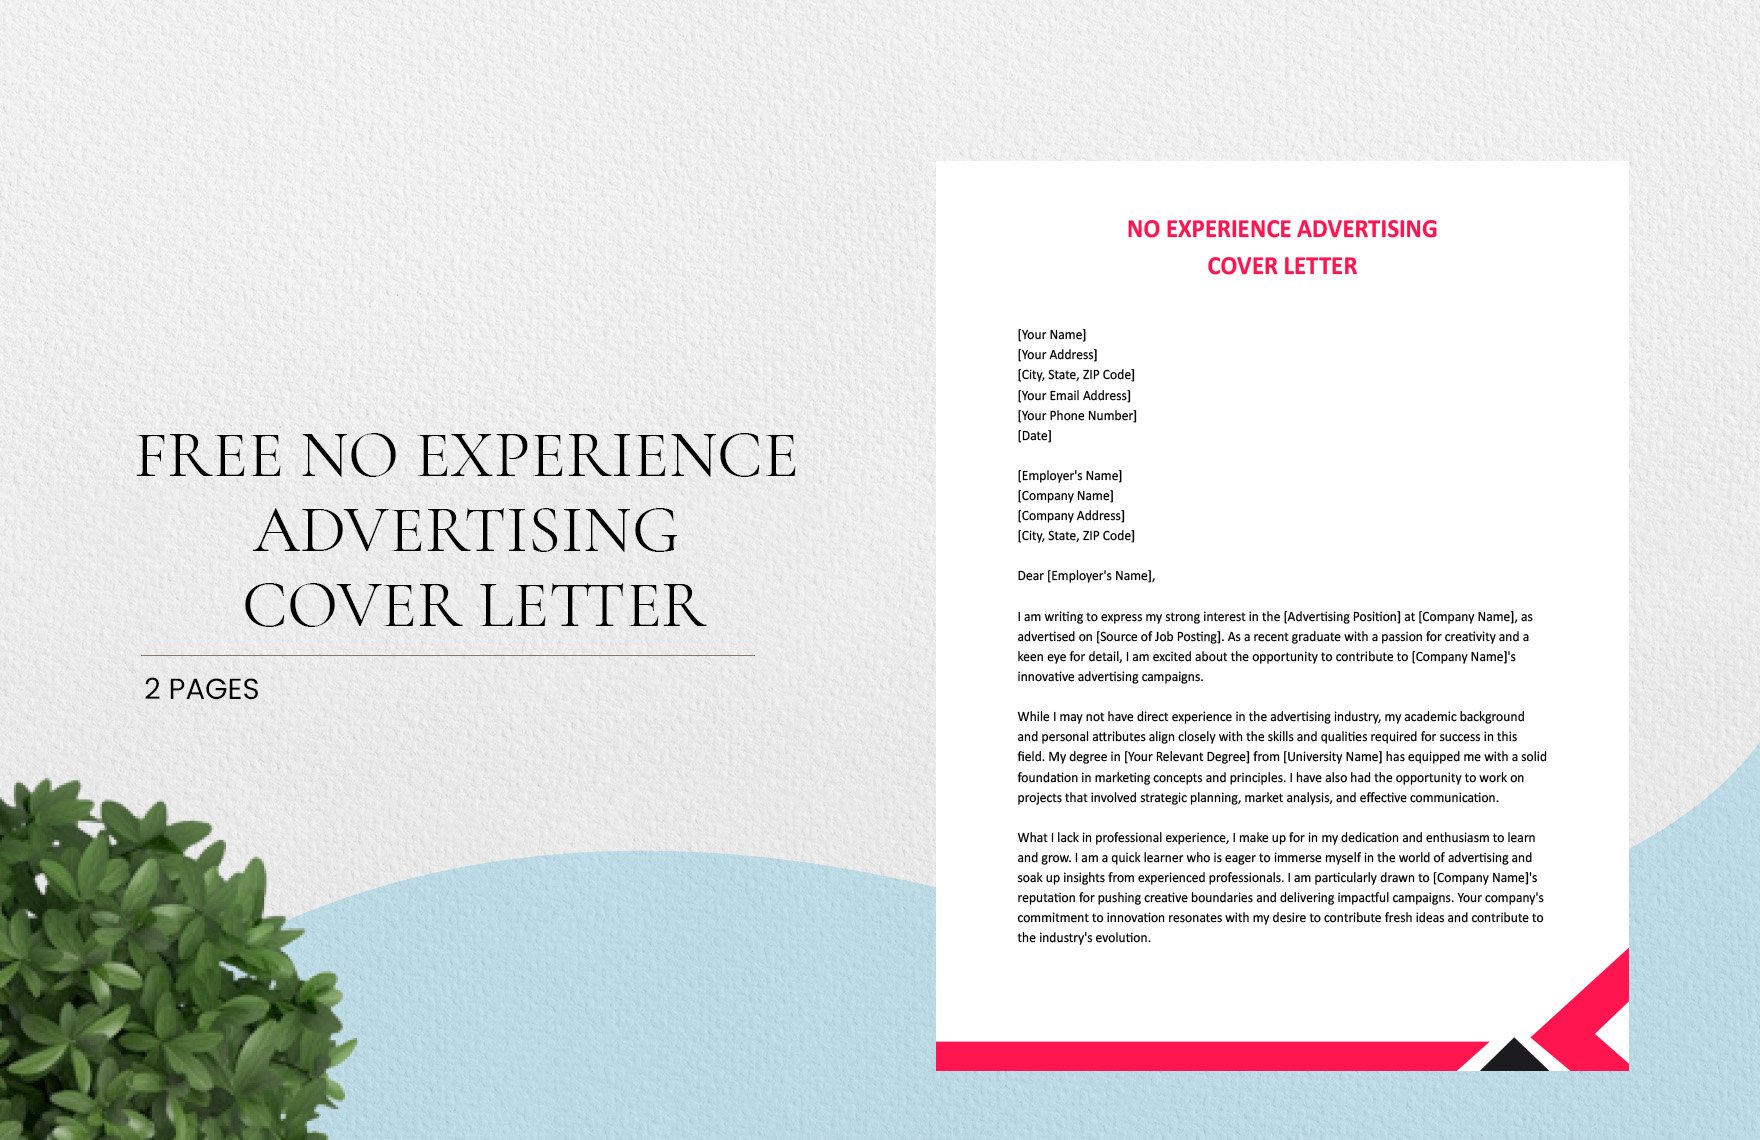 No Experience Advertising Cover Letter